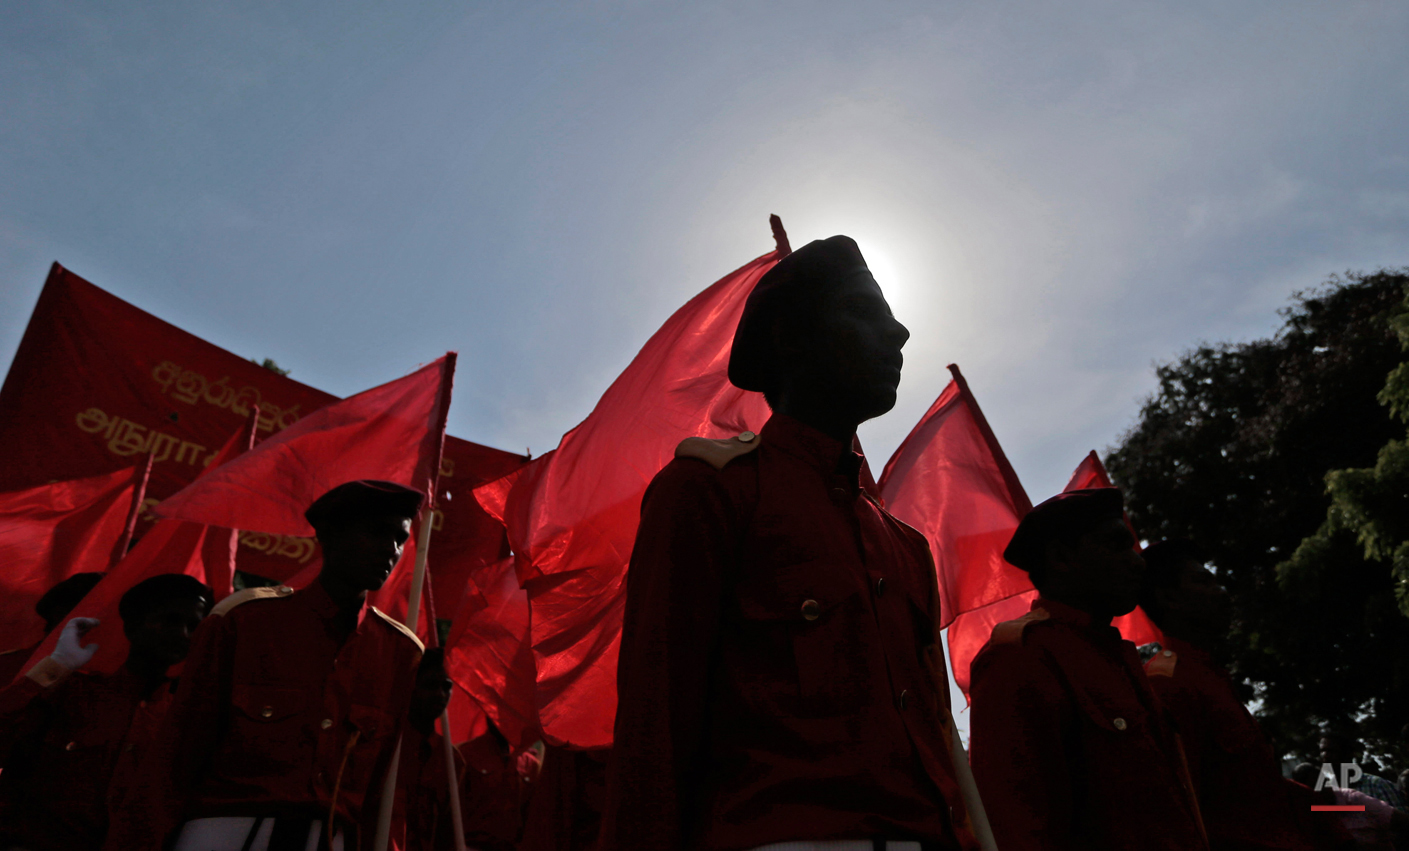  Activists of the Sri Lankan Marxist political party Peoples' Liberation Front march during a rally to mark International Labor Day in Colombo, Sri Lanka, Friday, May 1, 2015. (AP Photo/Eranga Jayawardena) 